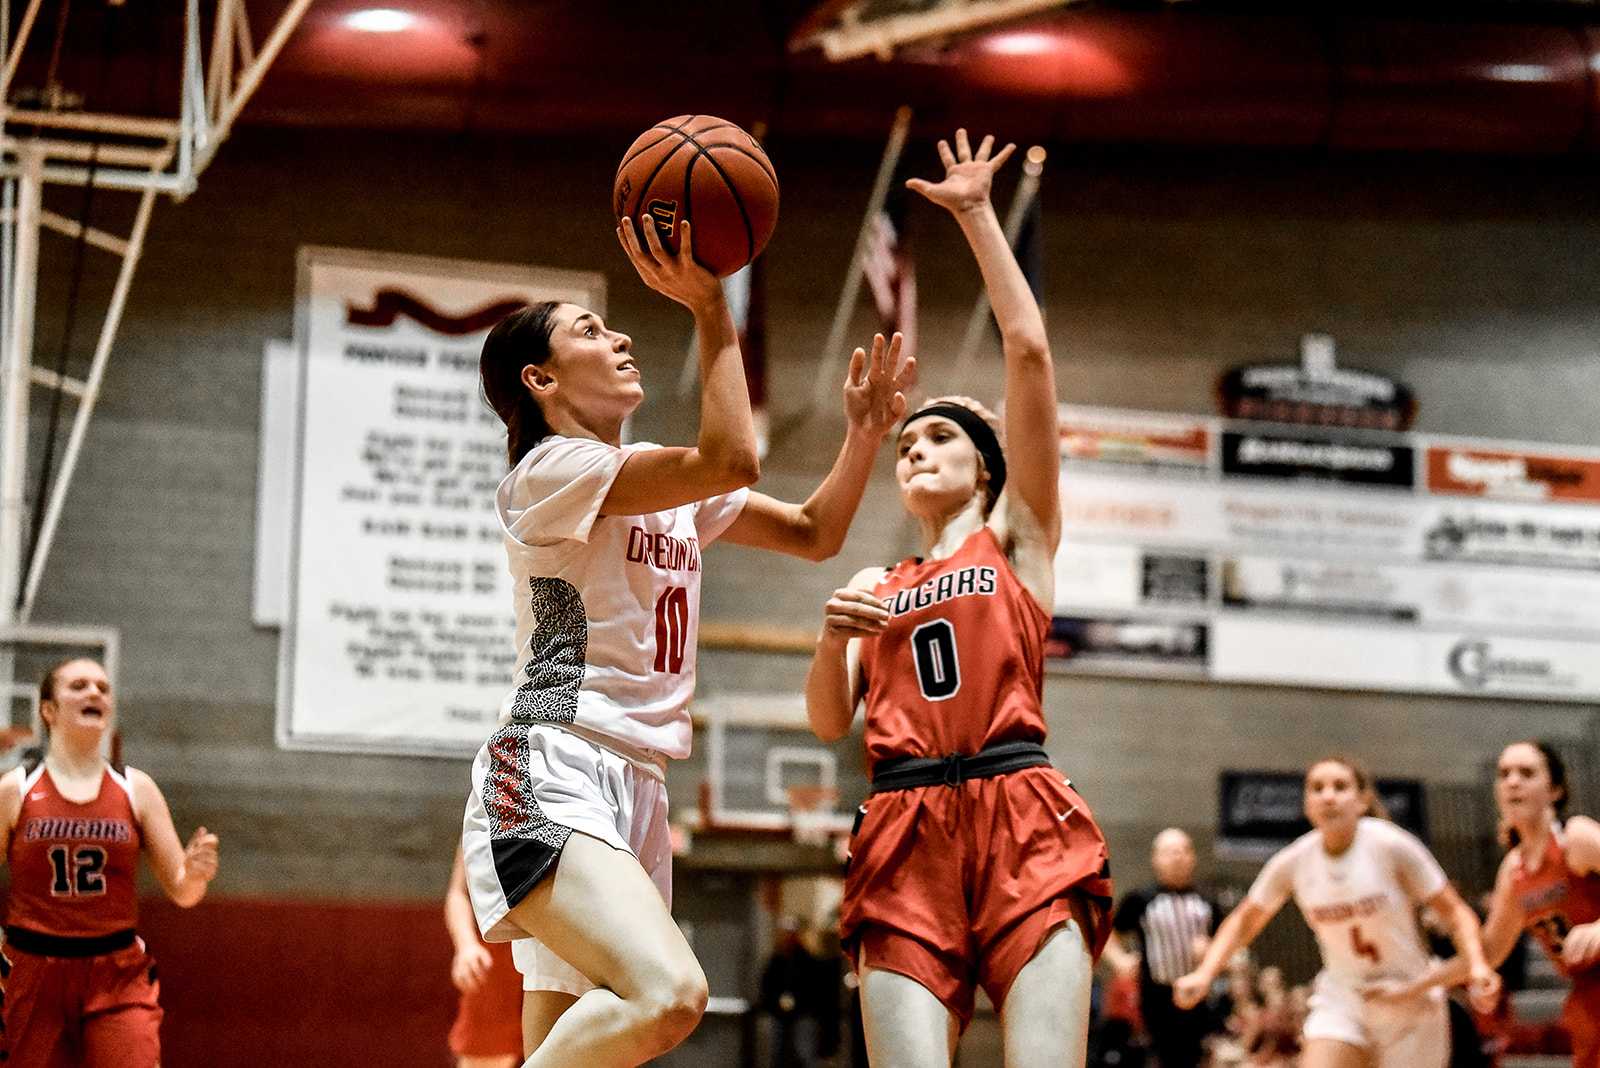 Madison Norton made three three-pointers and scored 13 points for Oregon City on Wednesday. (Photo by Fanta Mithmeuangneua)